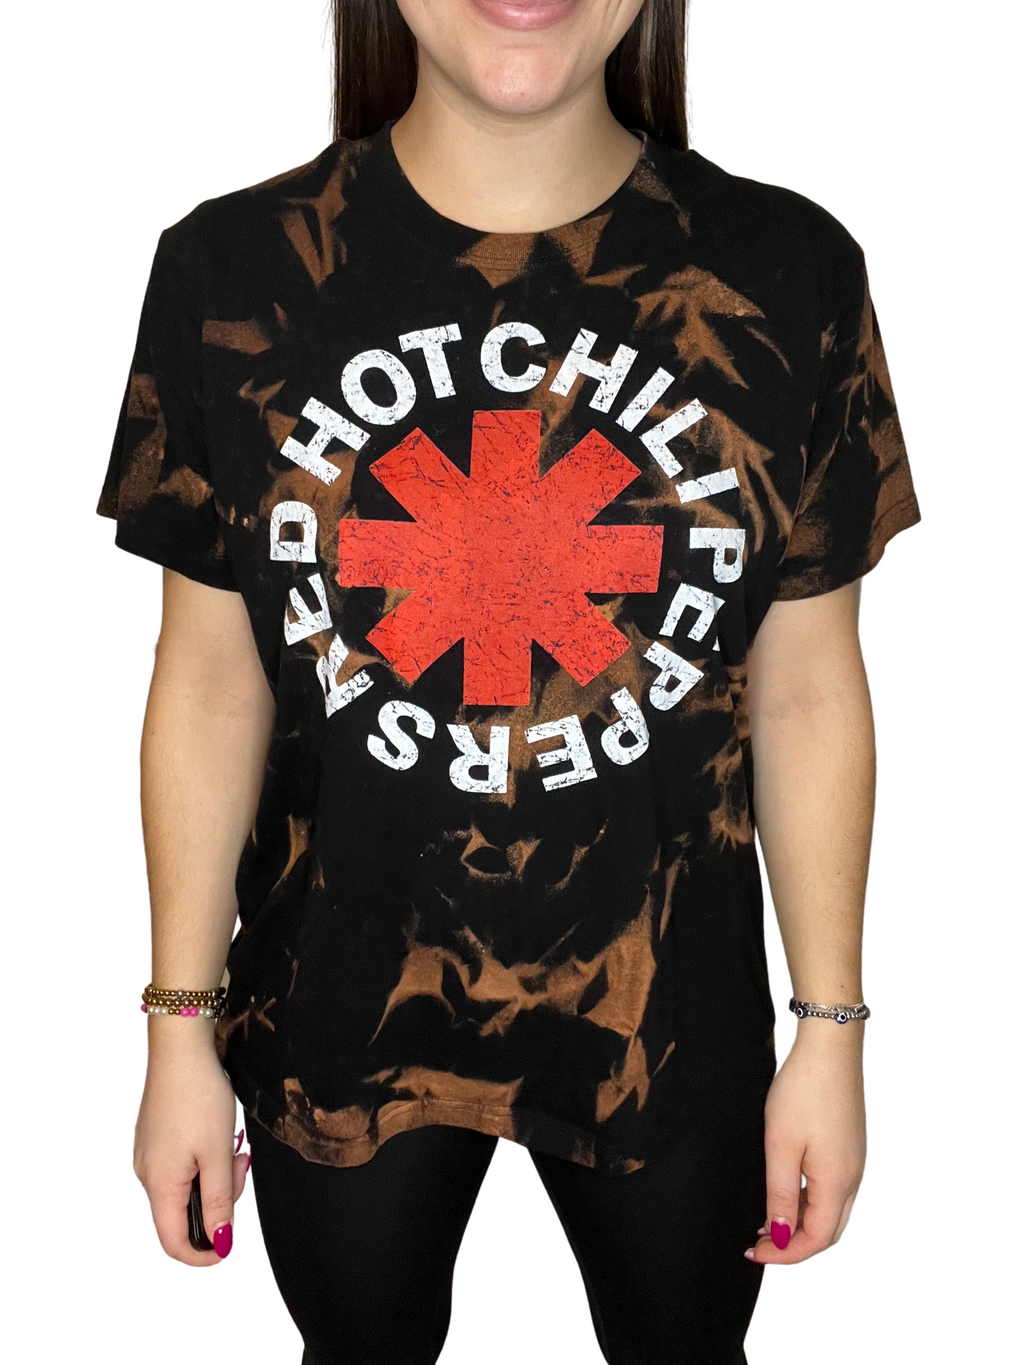 Red Hot Chili Peppers Bleached Shirt